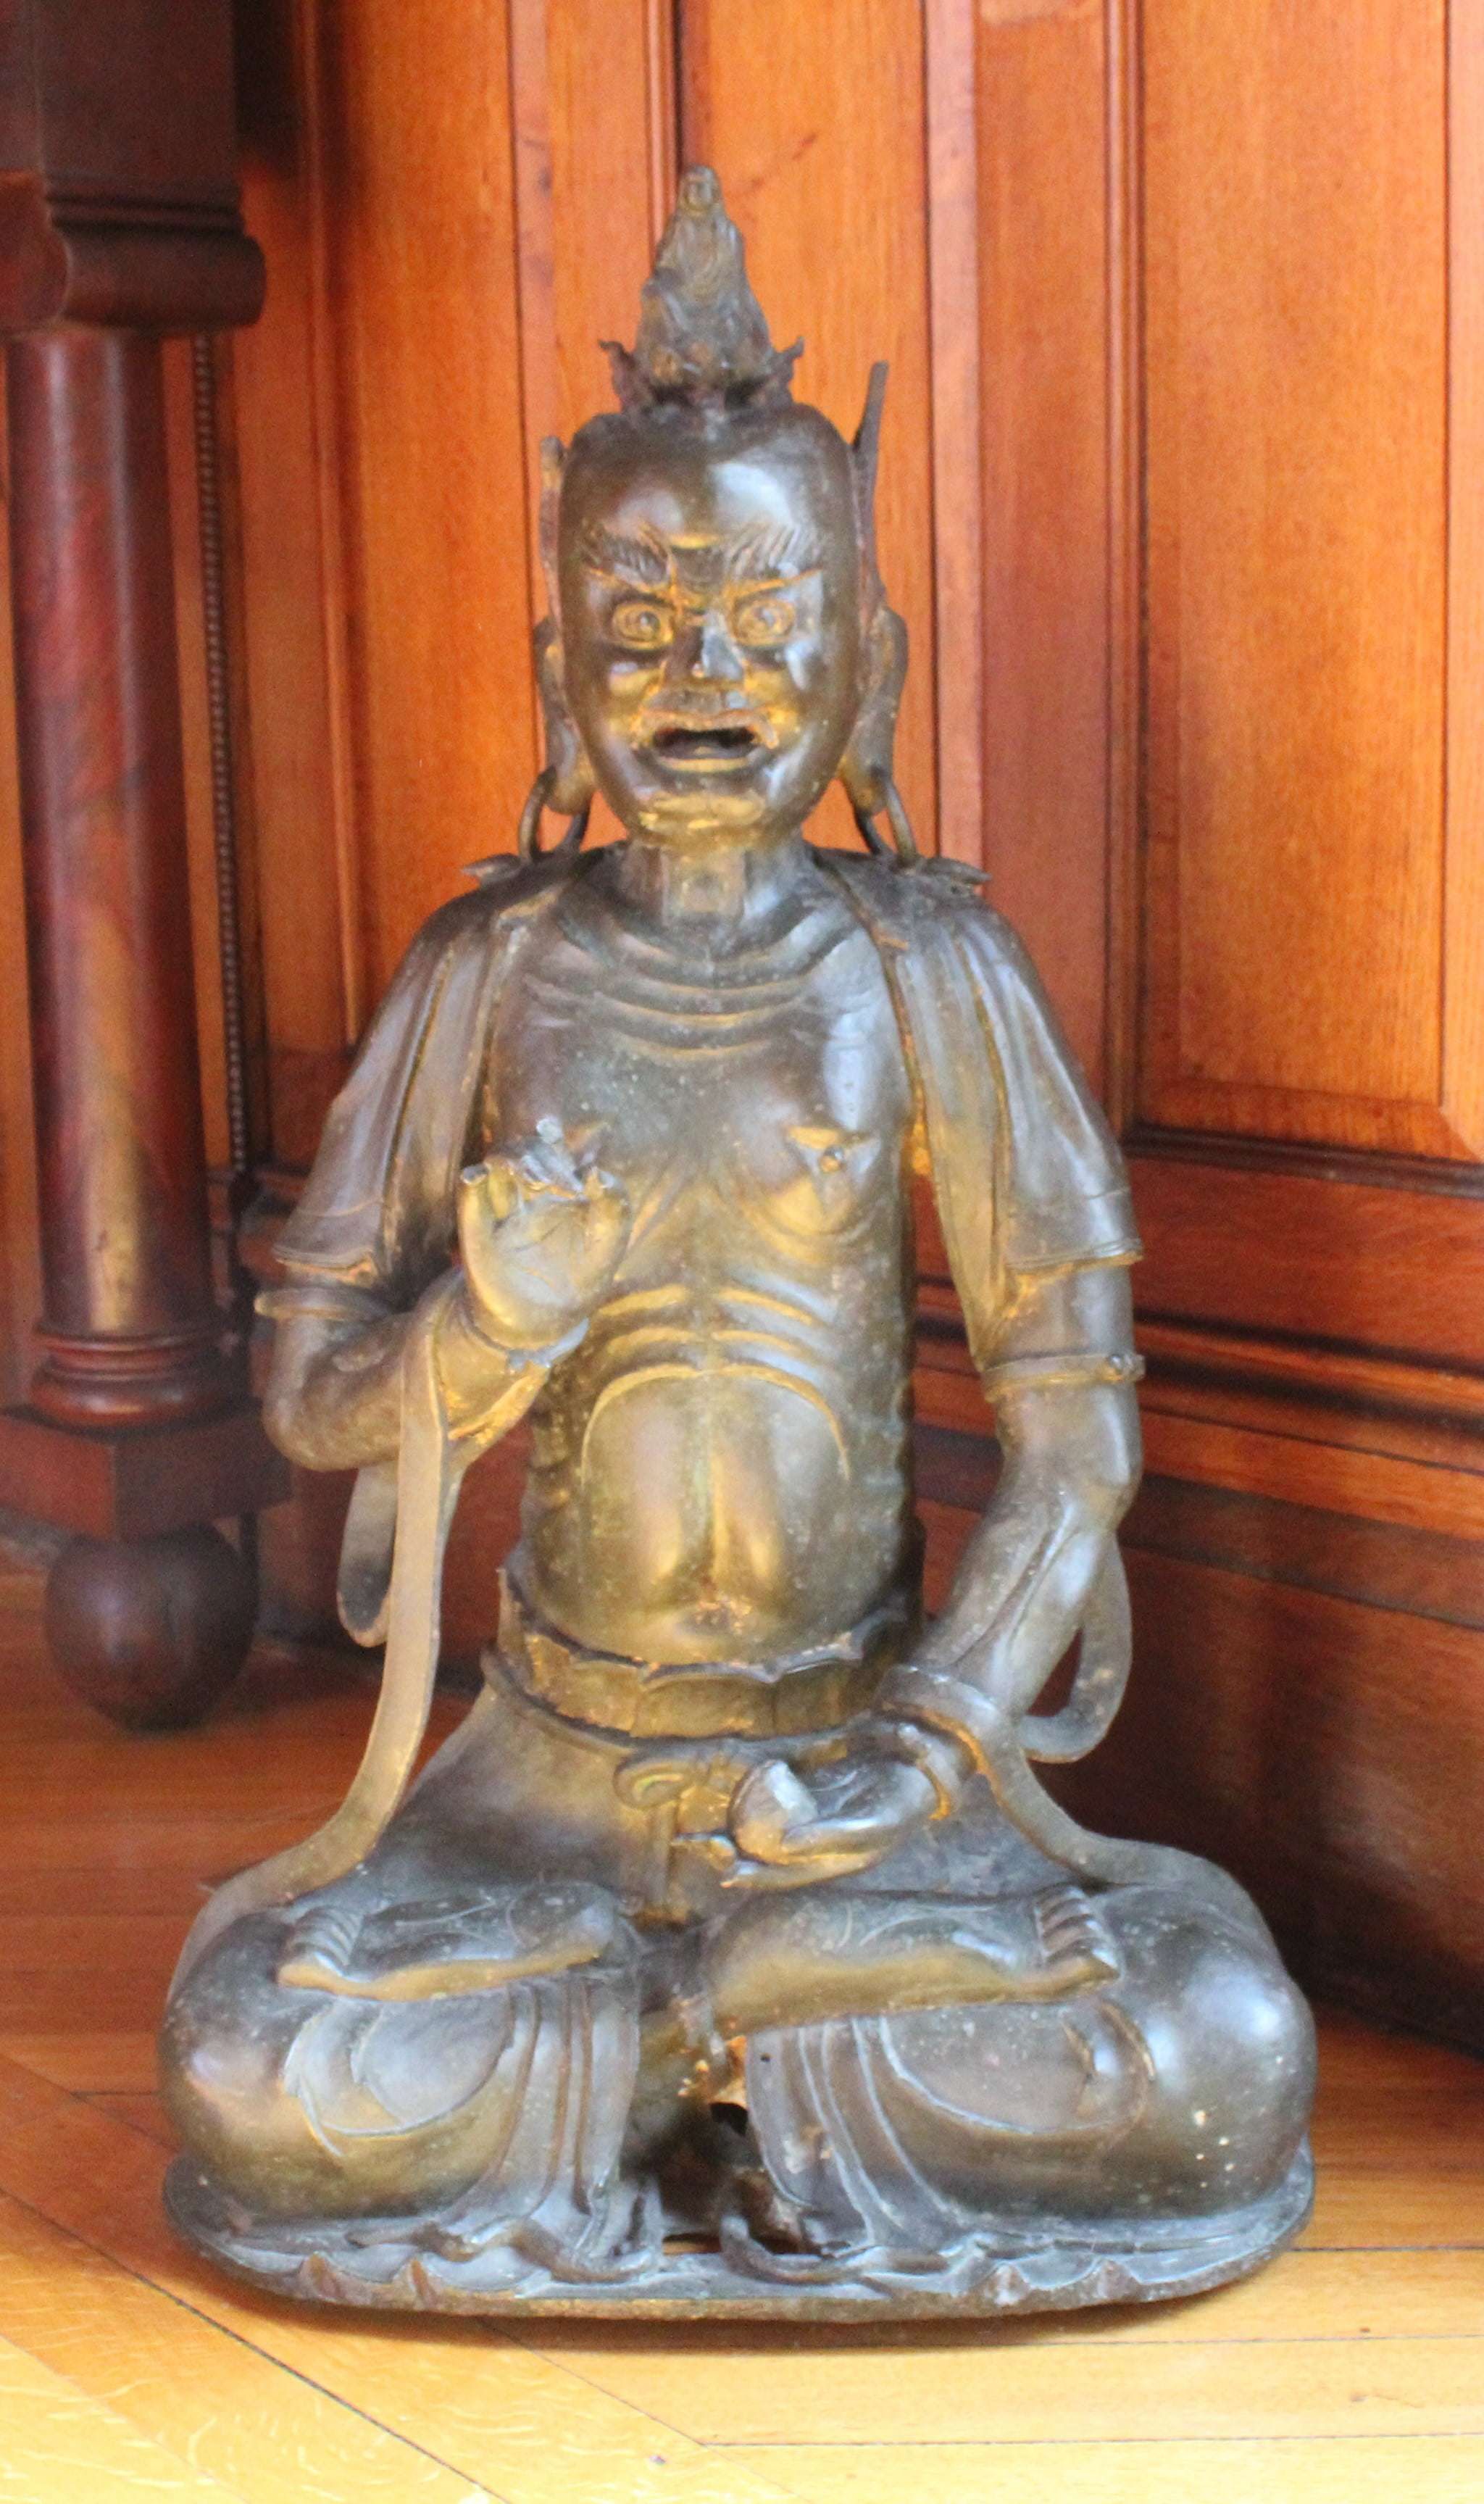 Image of bronze statue on display in the billiard room of the Davis Mansion